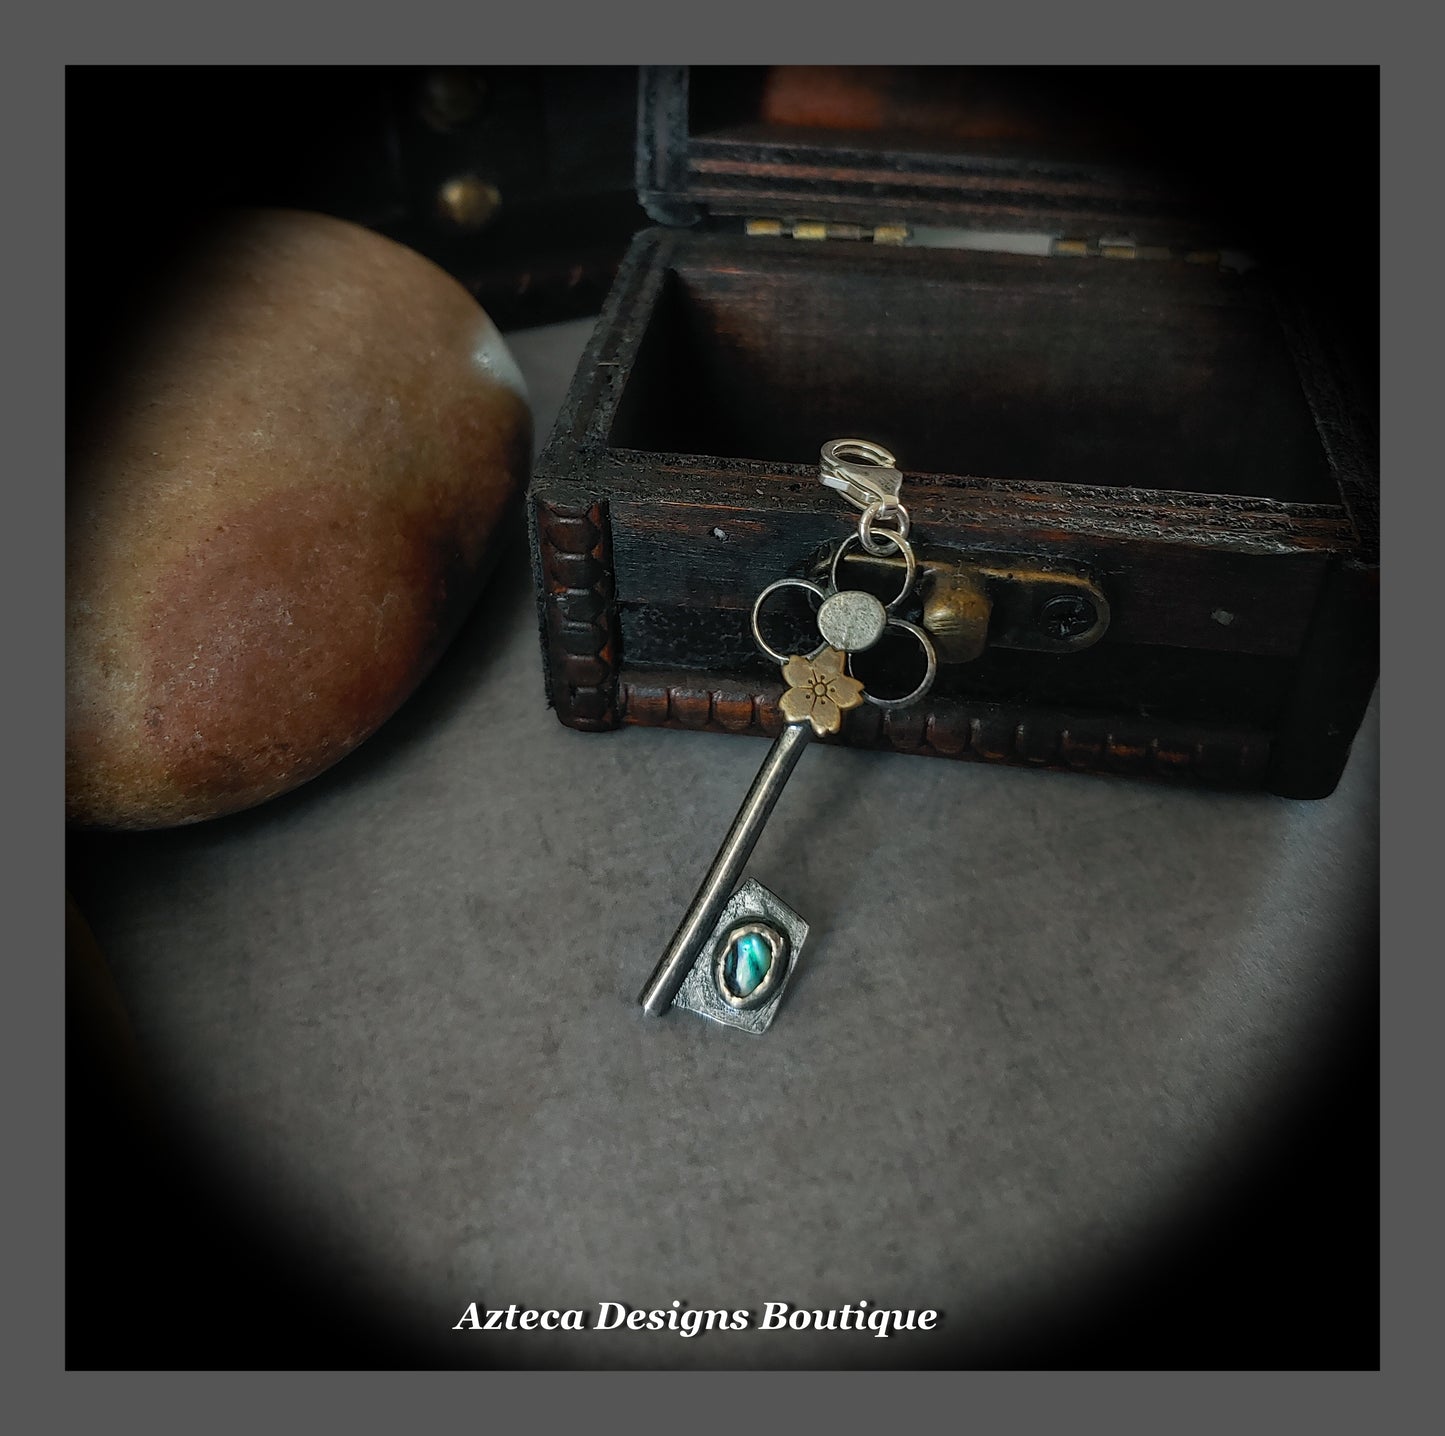 Paua Shell Key Pendant with Lobster Clasp + Hand Fabricated Argentium Silver + Blackened Finish